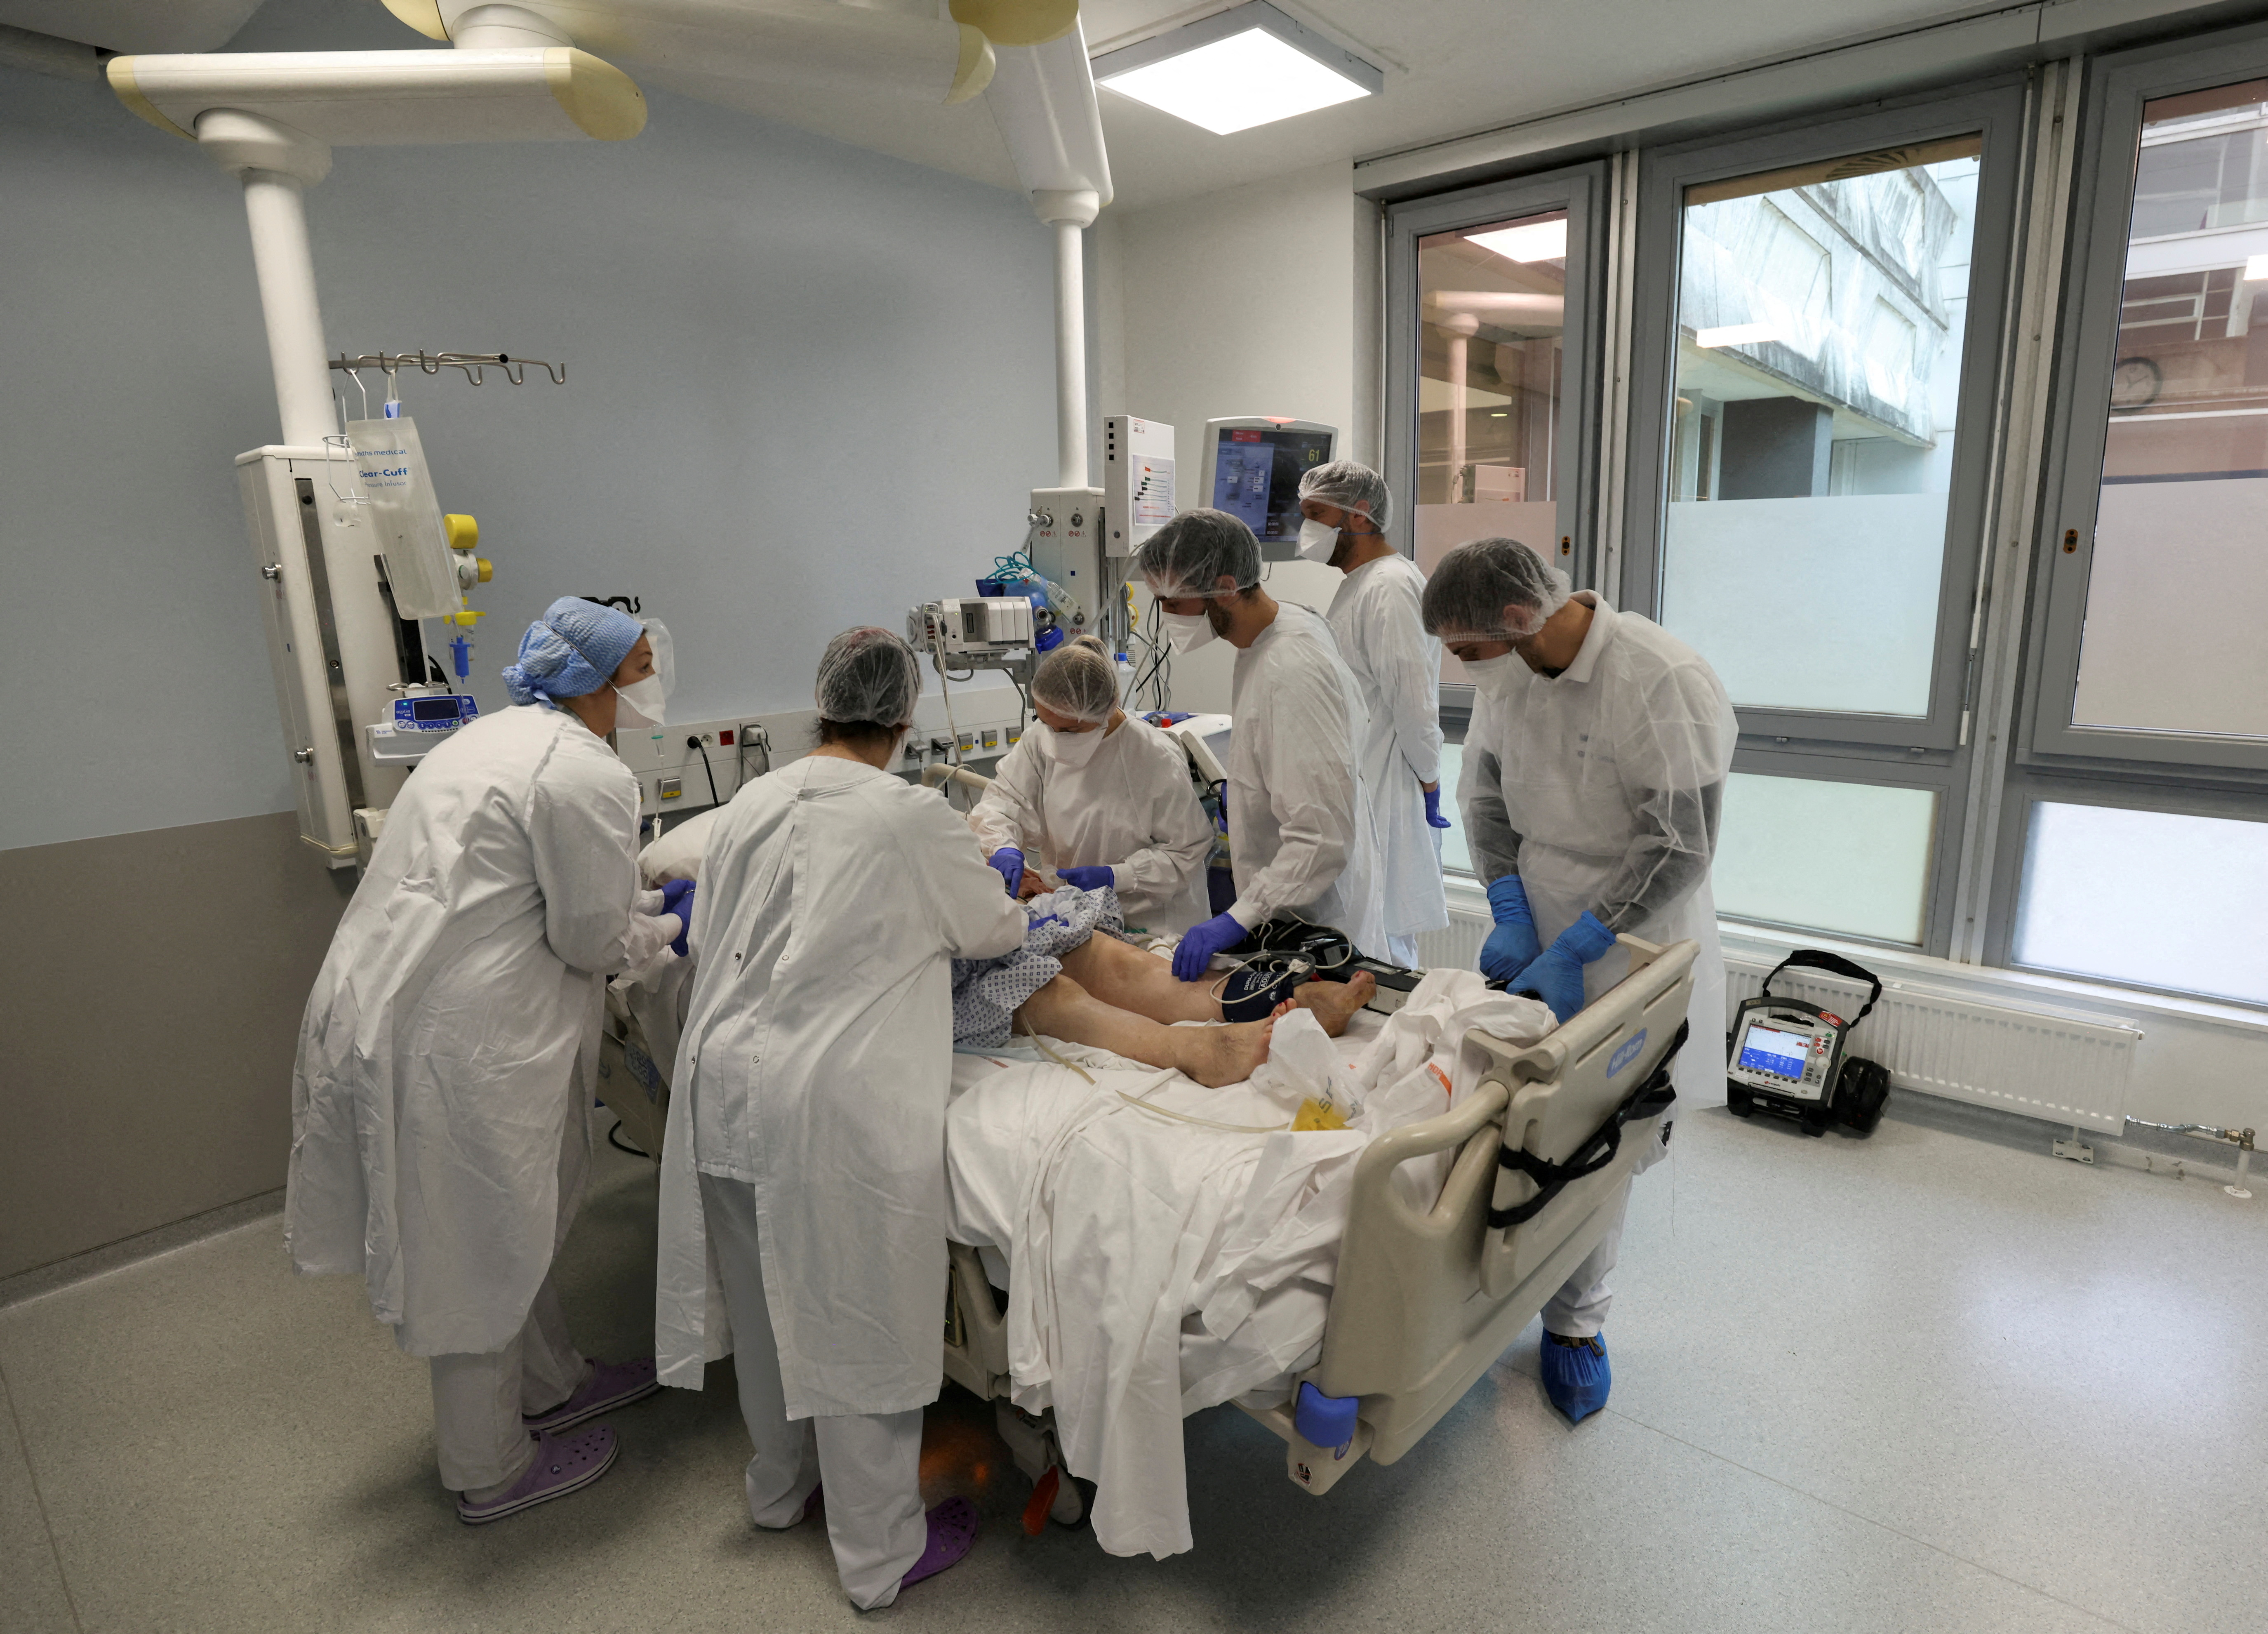 Medical personnel work at the Intensive Care Unit (ICU) for COVID-19 patients at the Emile Muller GHRMSA hospital in Mulhouse, France, December 16, 2021. REUTERS/Yves Herman